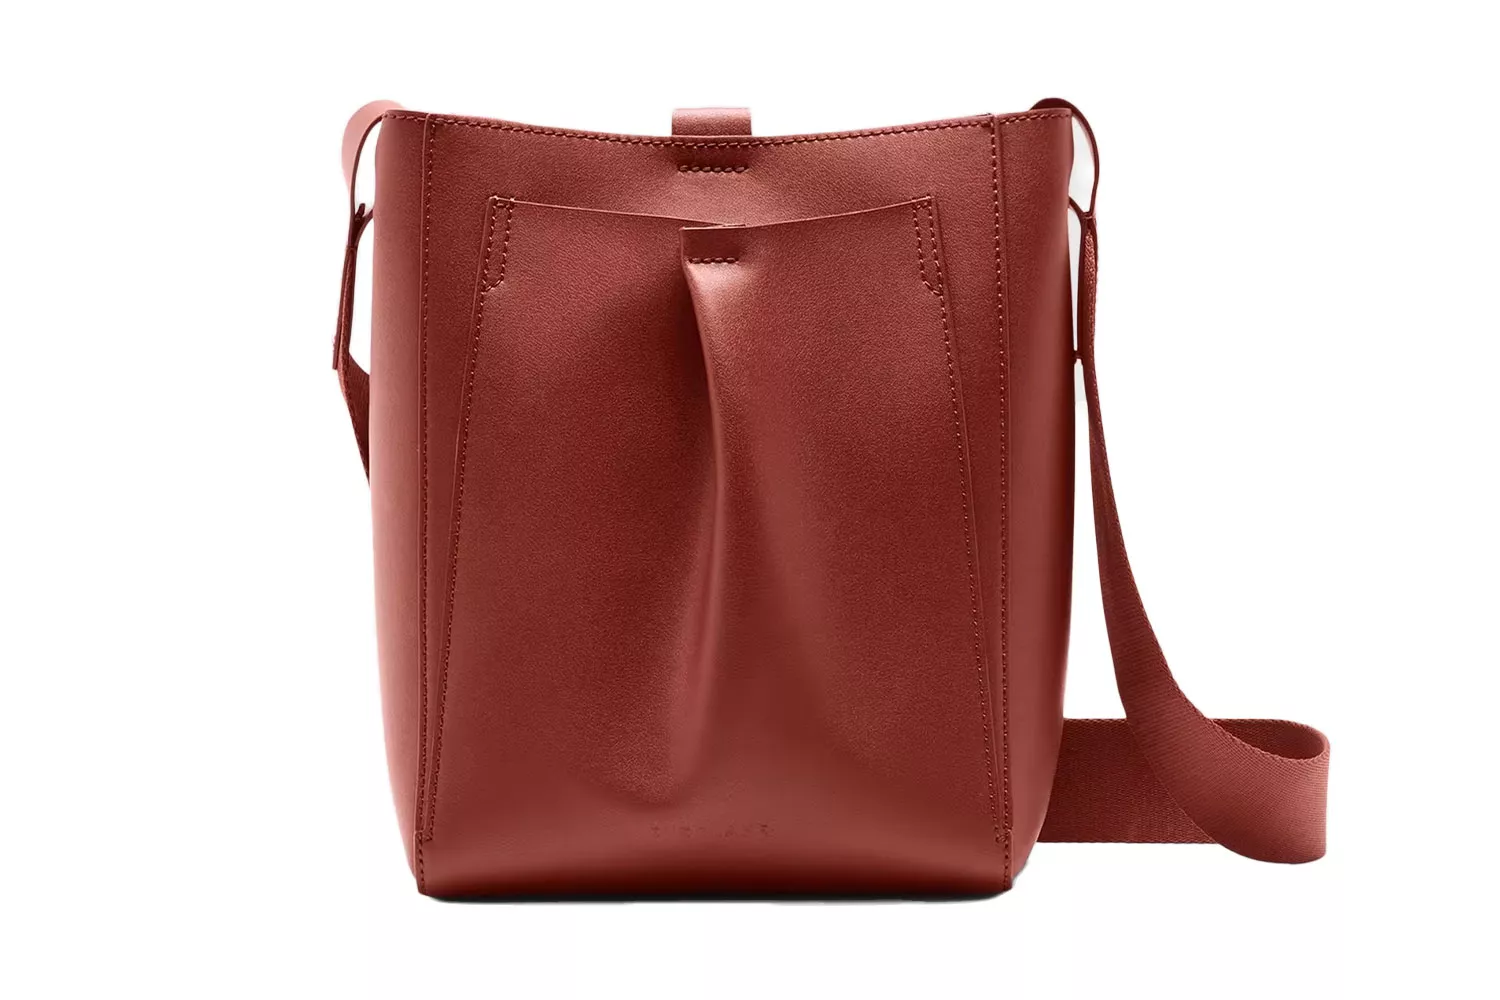 The Best Minimalist Crossbody Bags that Make Your Busy Days Easier: Everlane The Italian Leather Mini Studio Bag